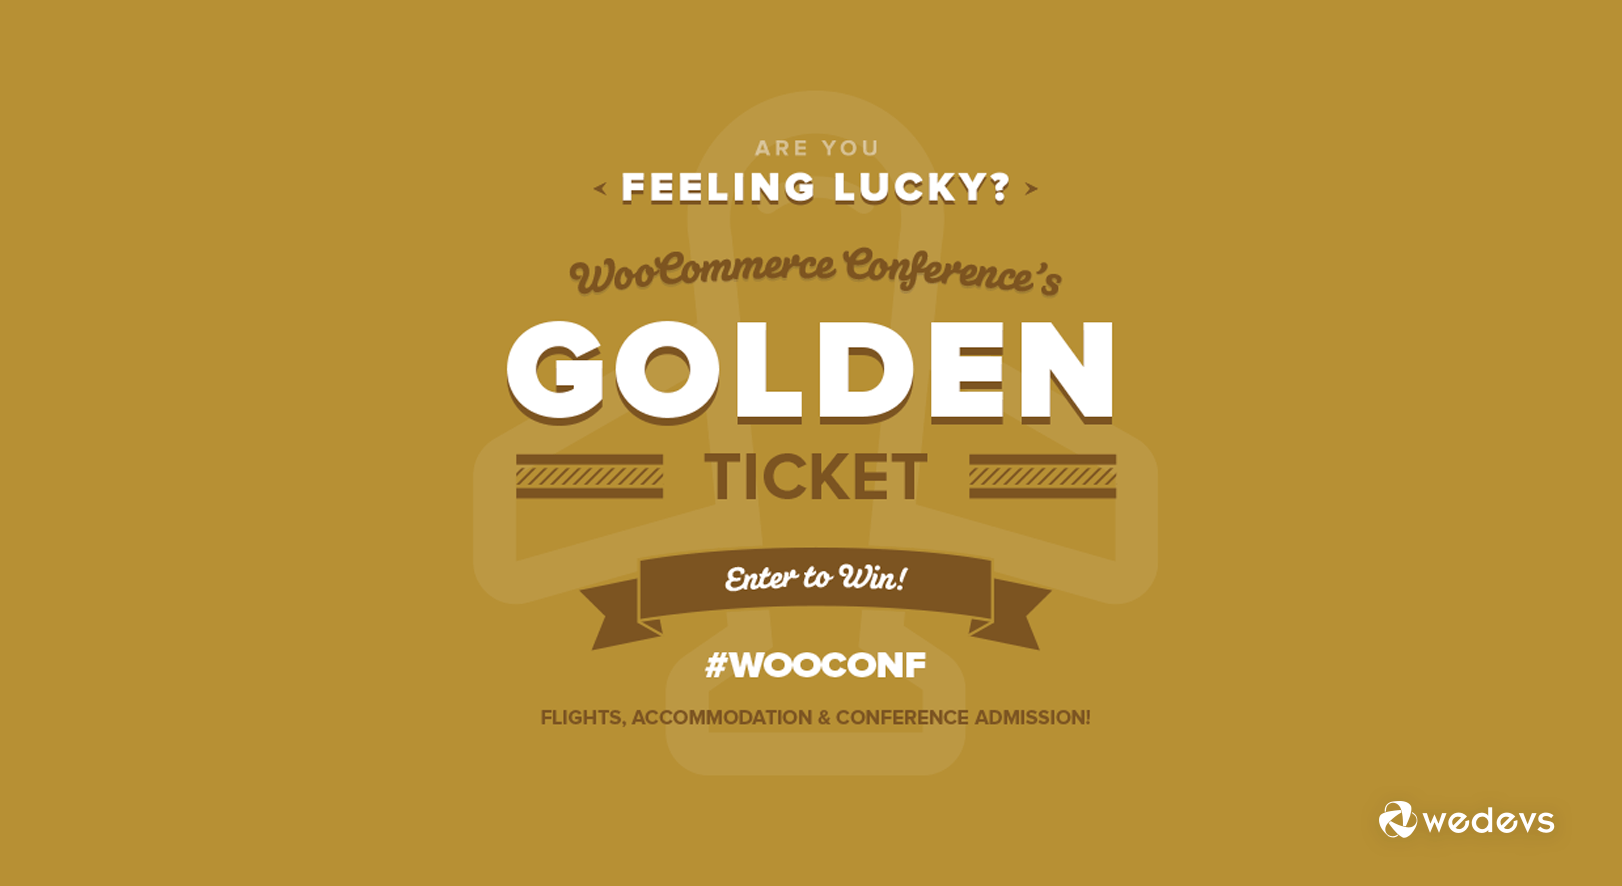 Dokan User? Enter For Your Chance to Win a Ticket to WooCommerce Conference in San Francisco